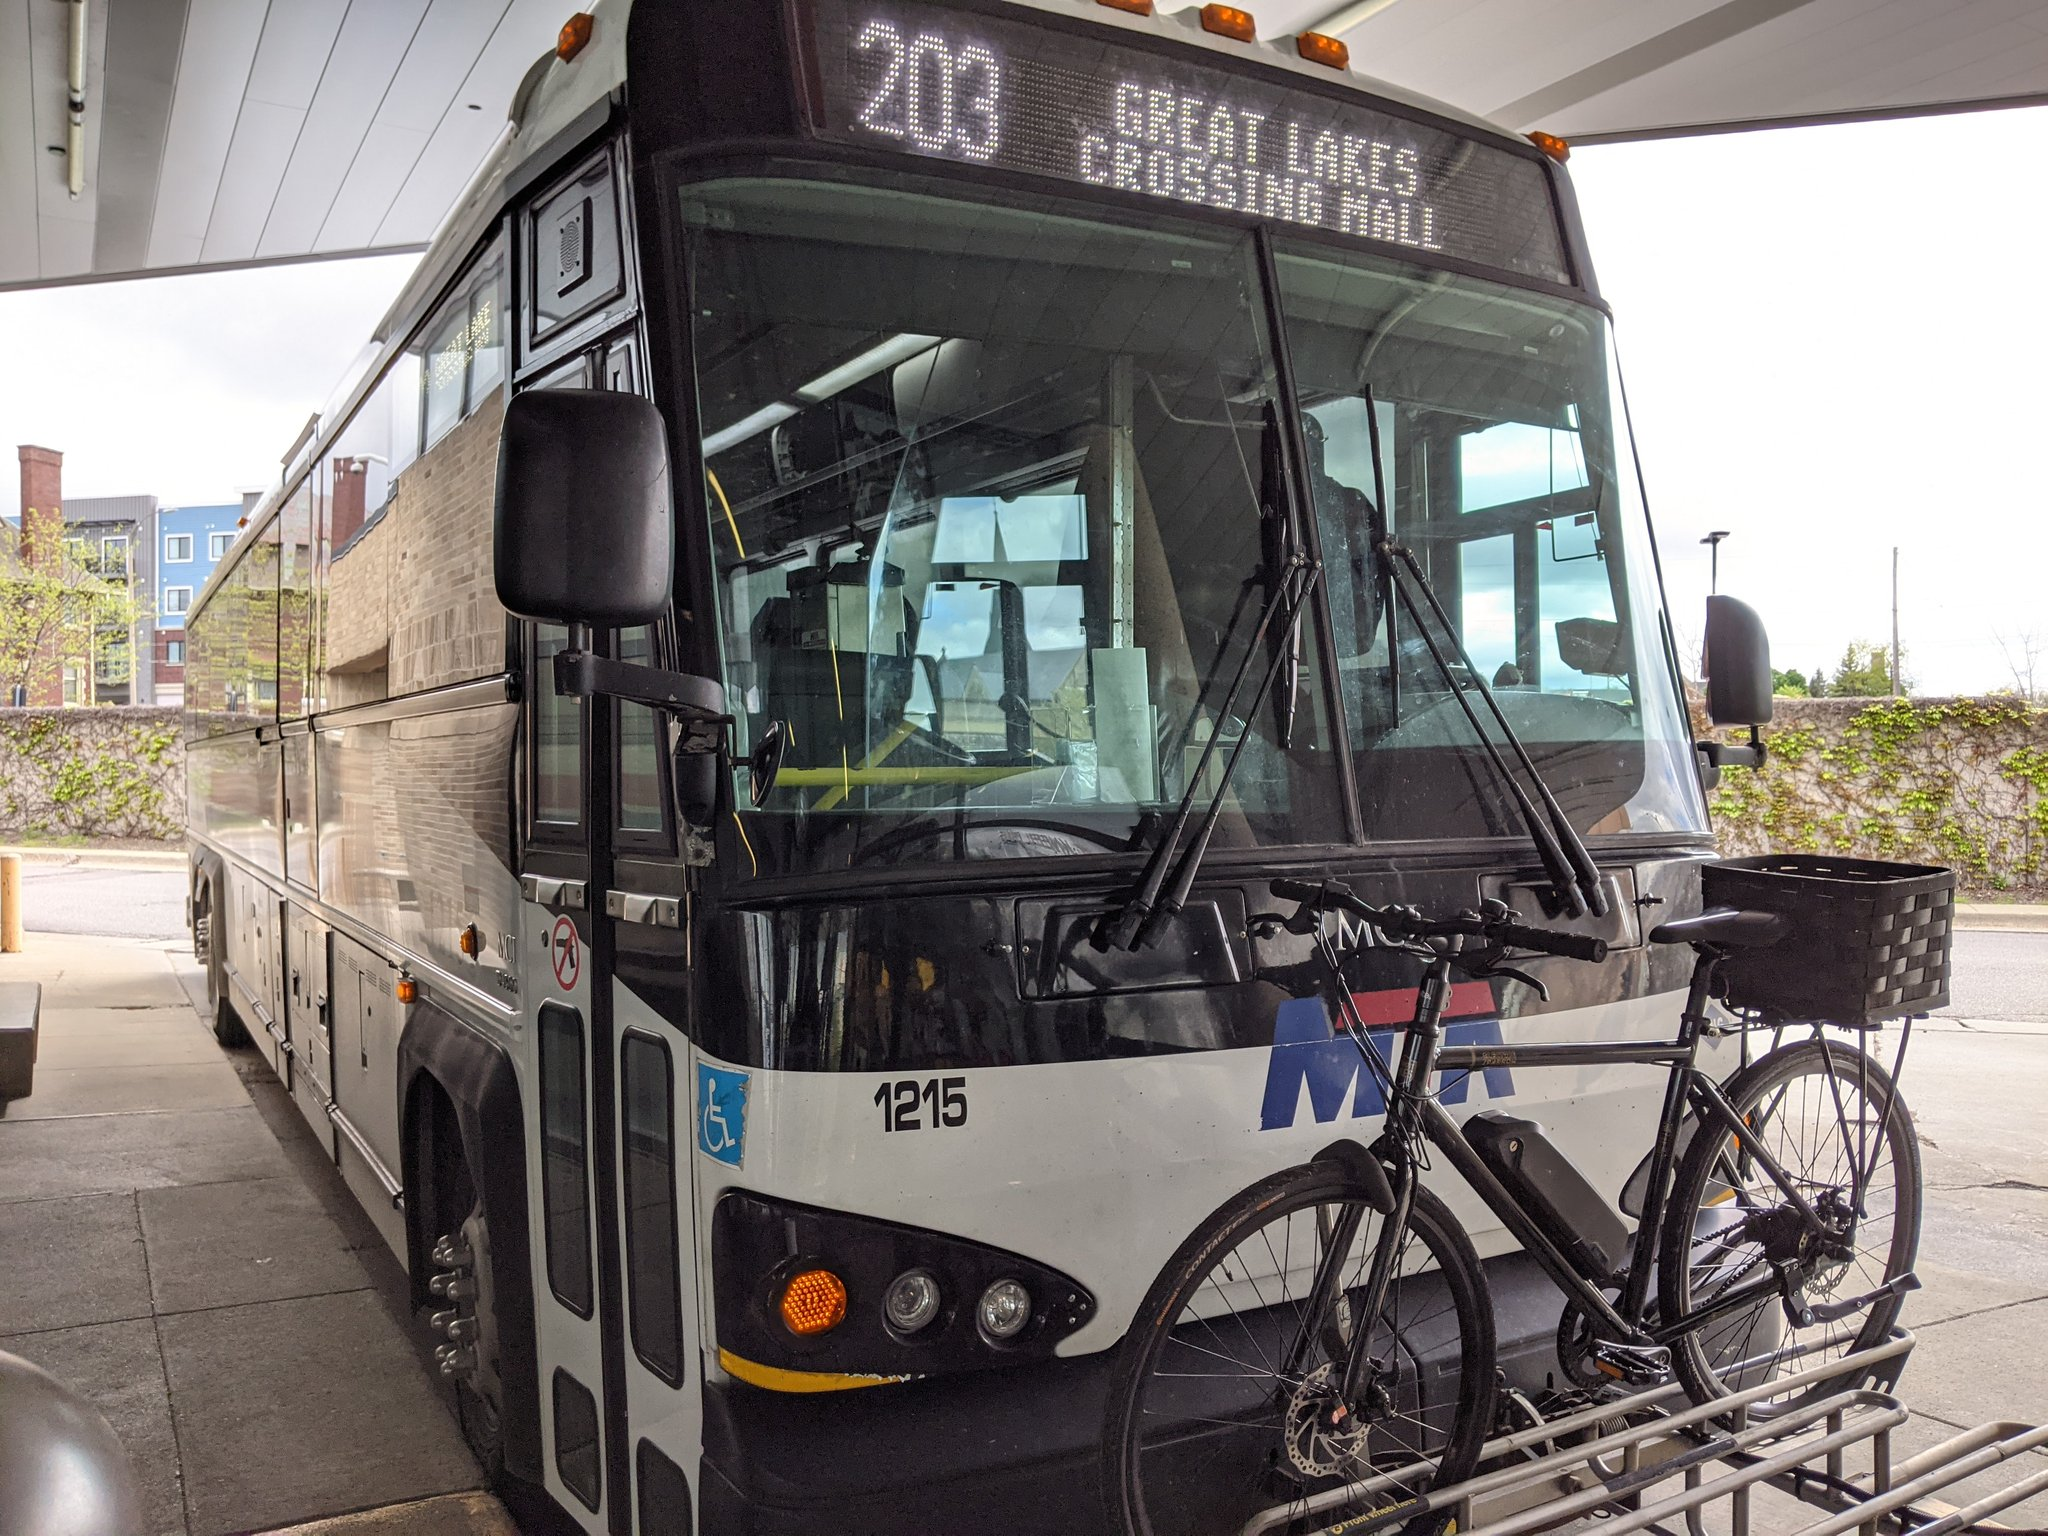 The MTA Great Lakes Crossing Regional bus with my bike on the front rack.